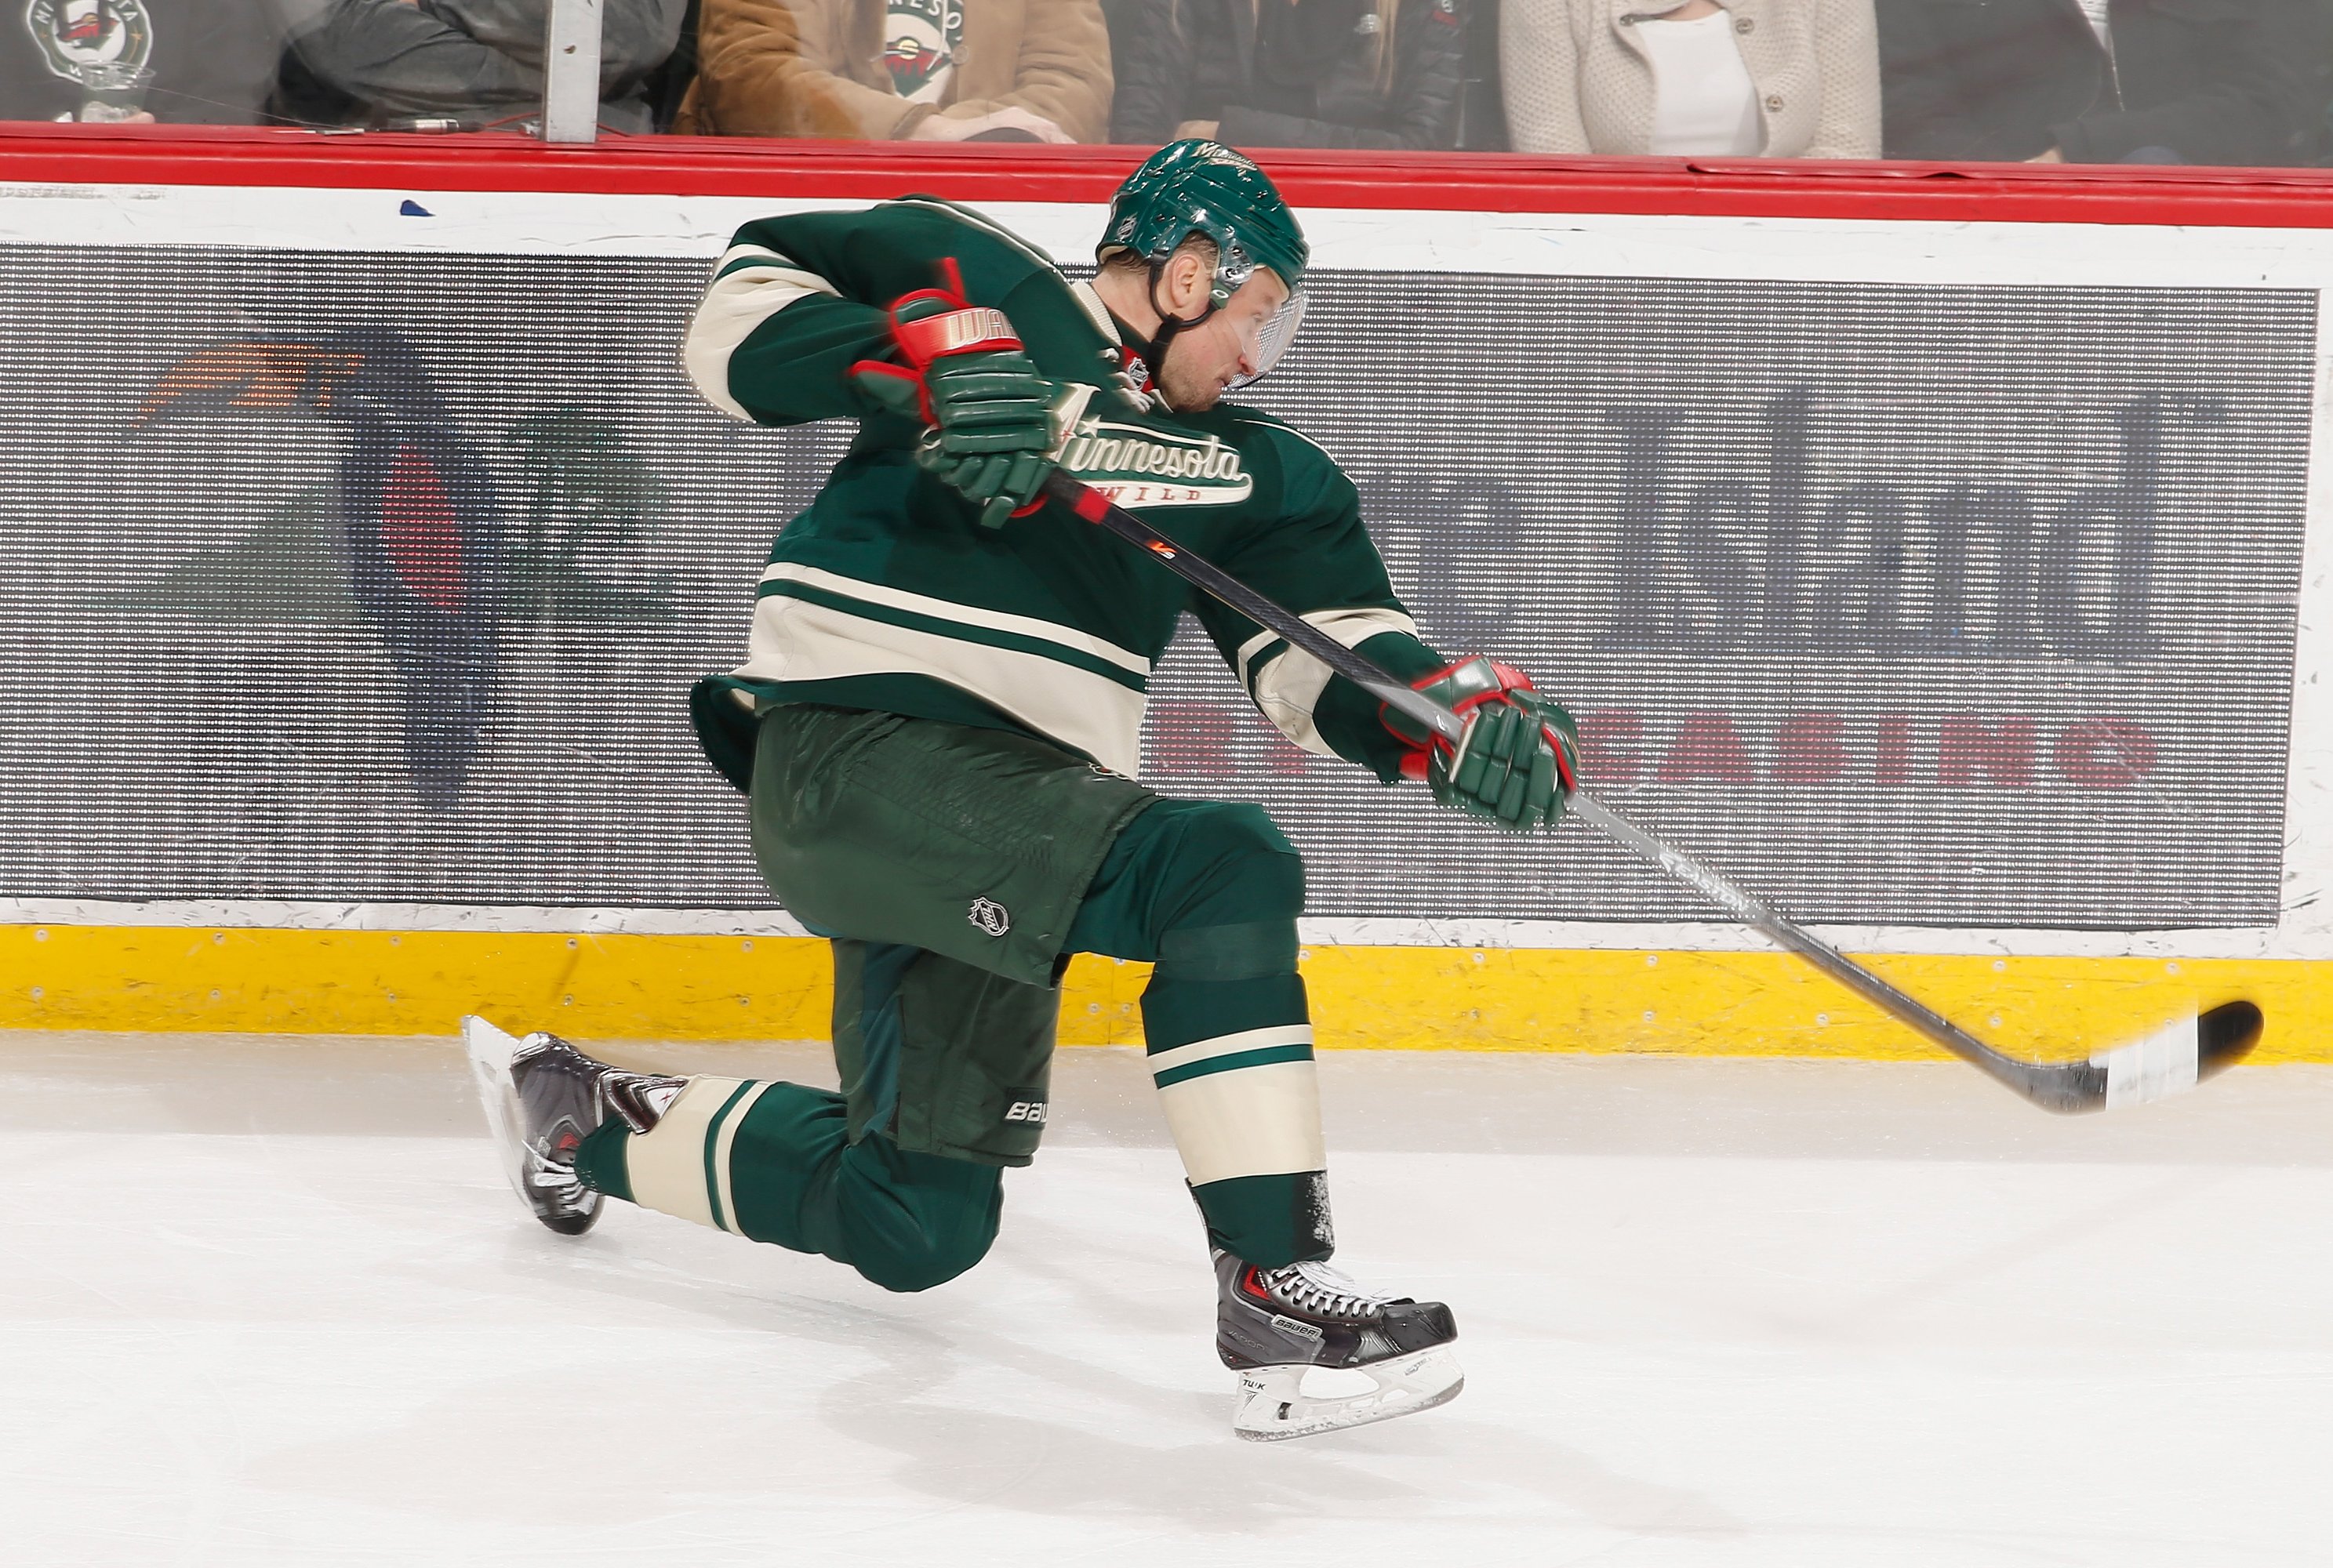 Greatness, Murder, and the Last Days: Dany Heatley's Rise and Fall